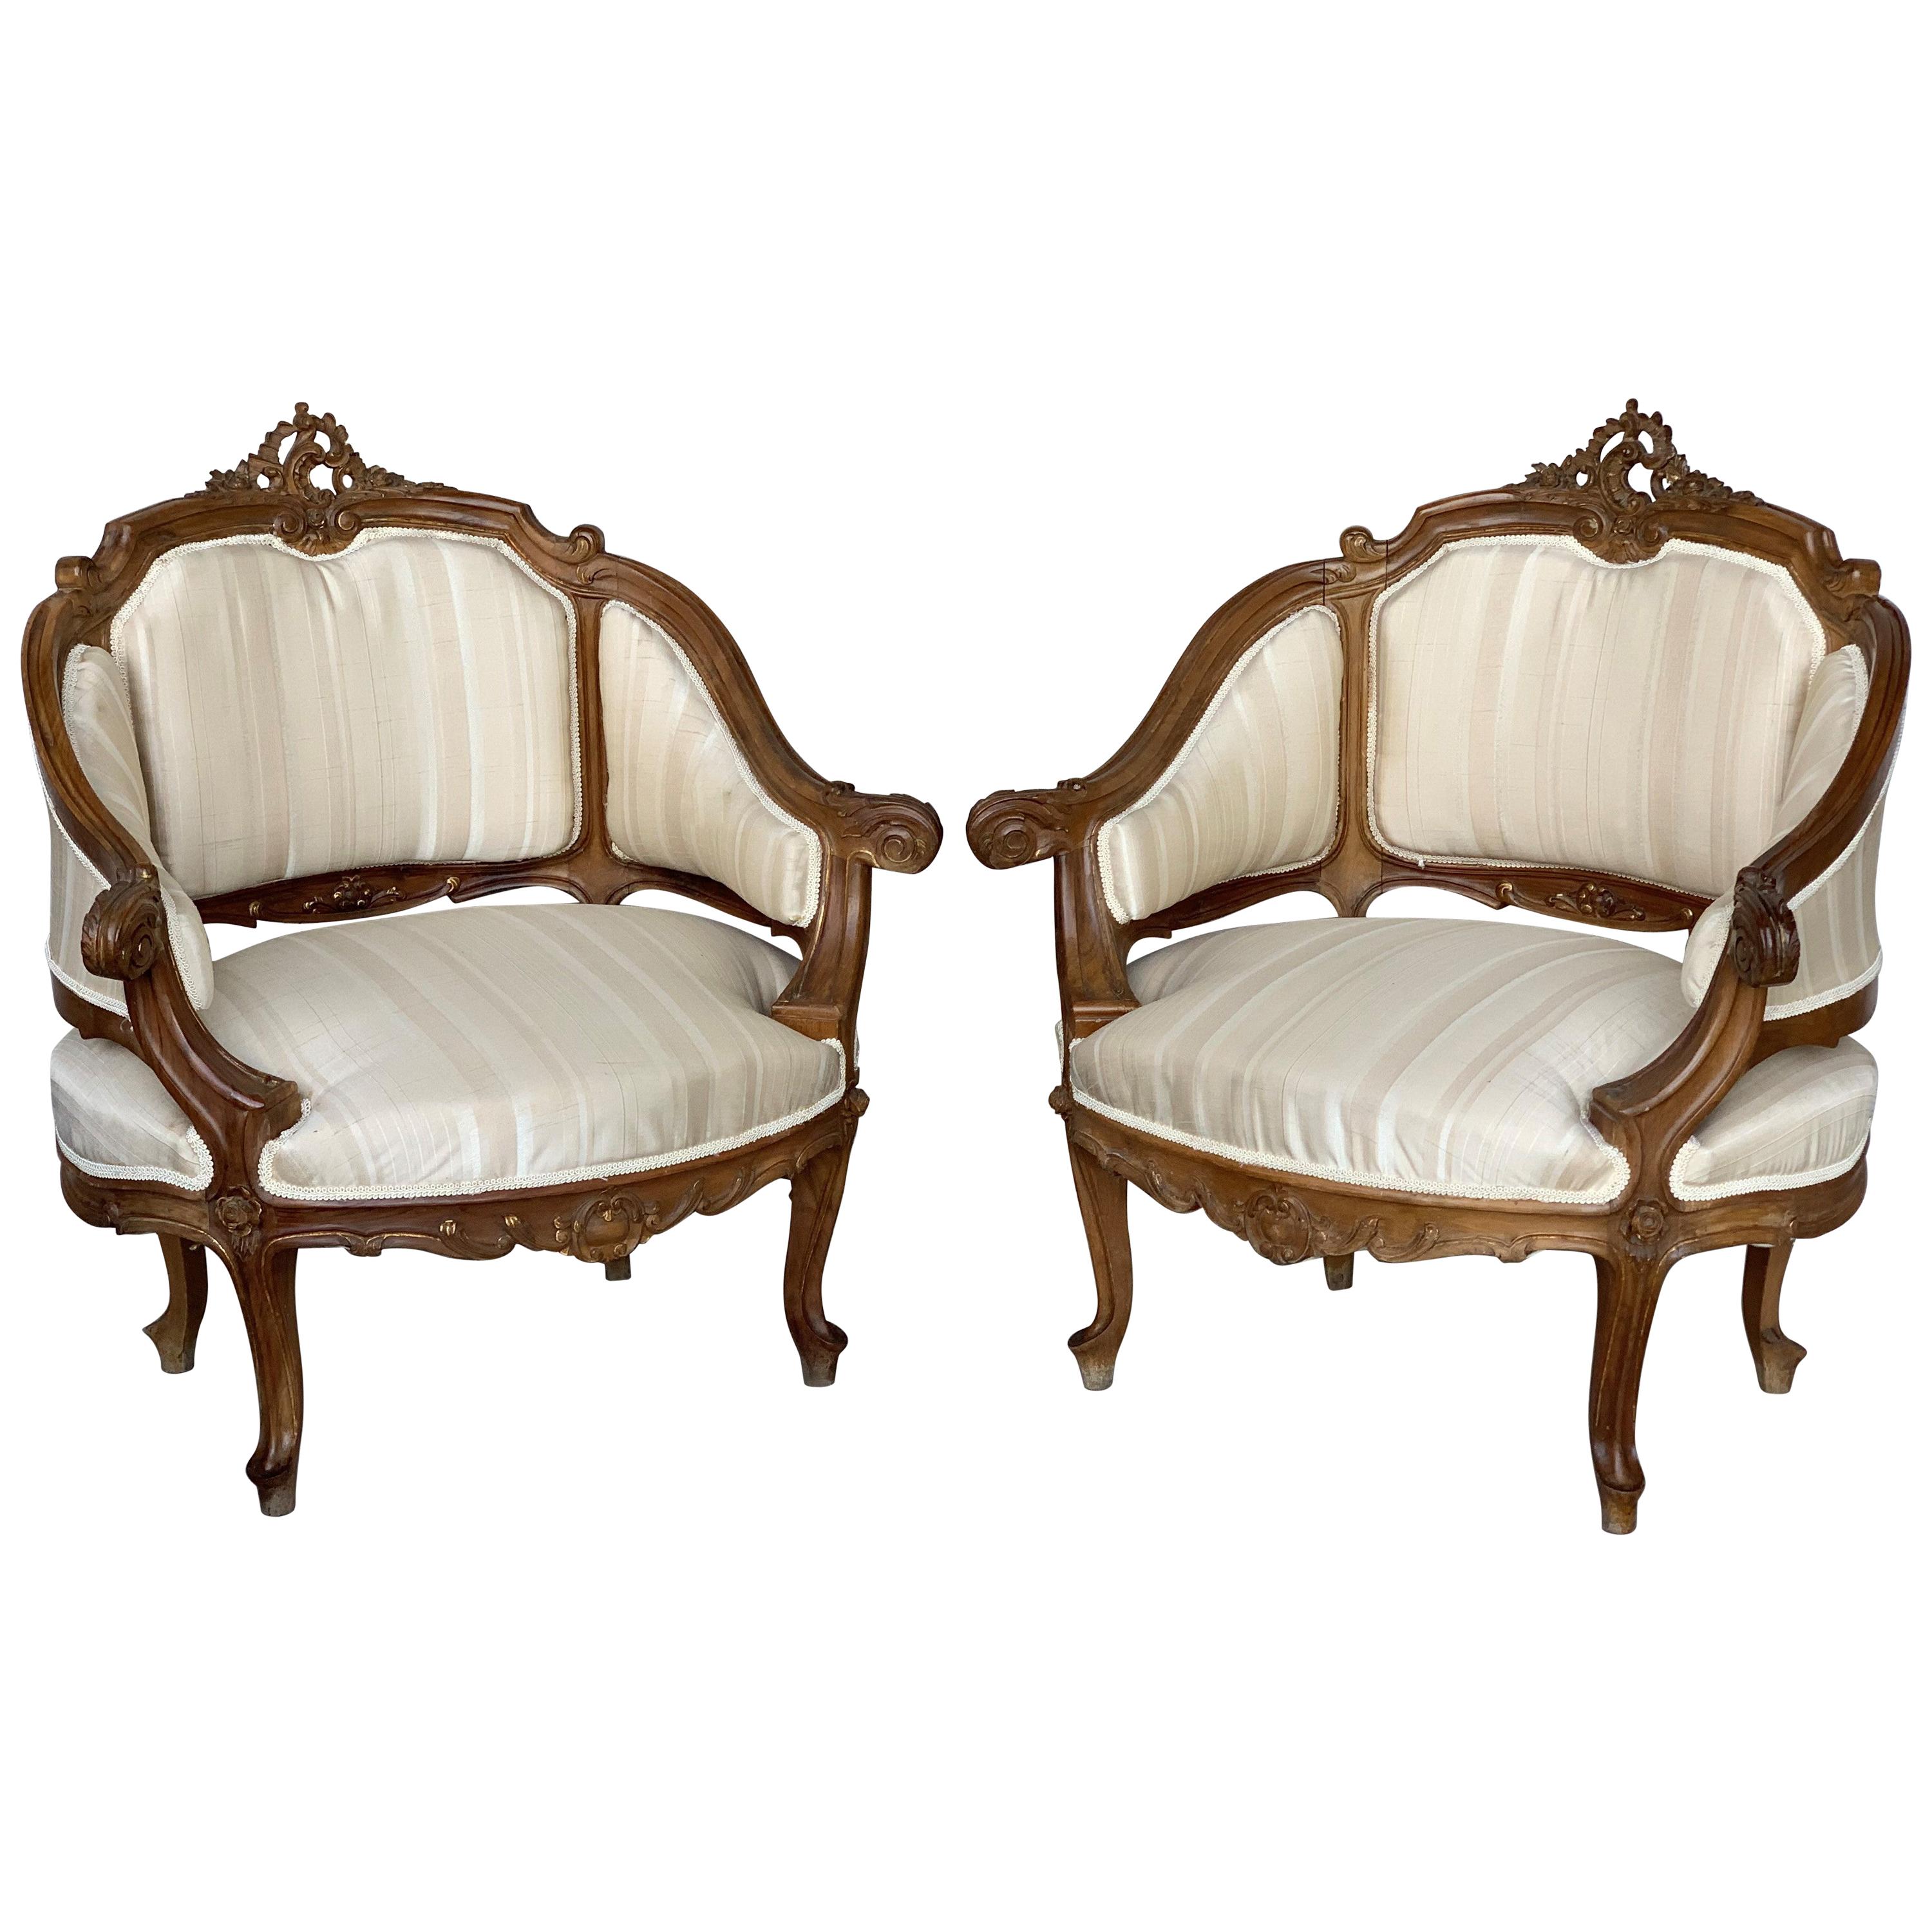 Pair of Italian Rococó Louis XV Fauteuils or Slipper Chairs